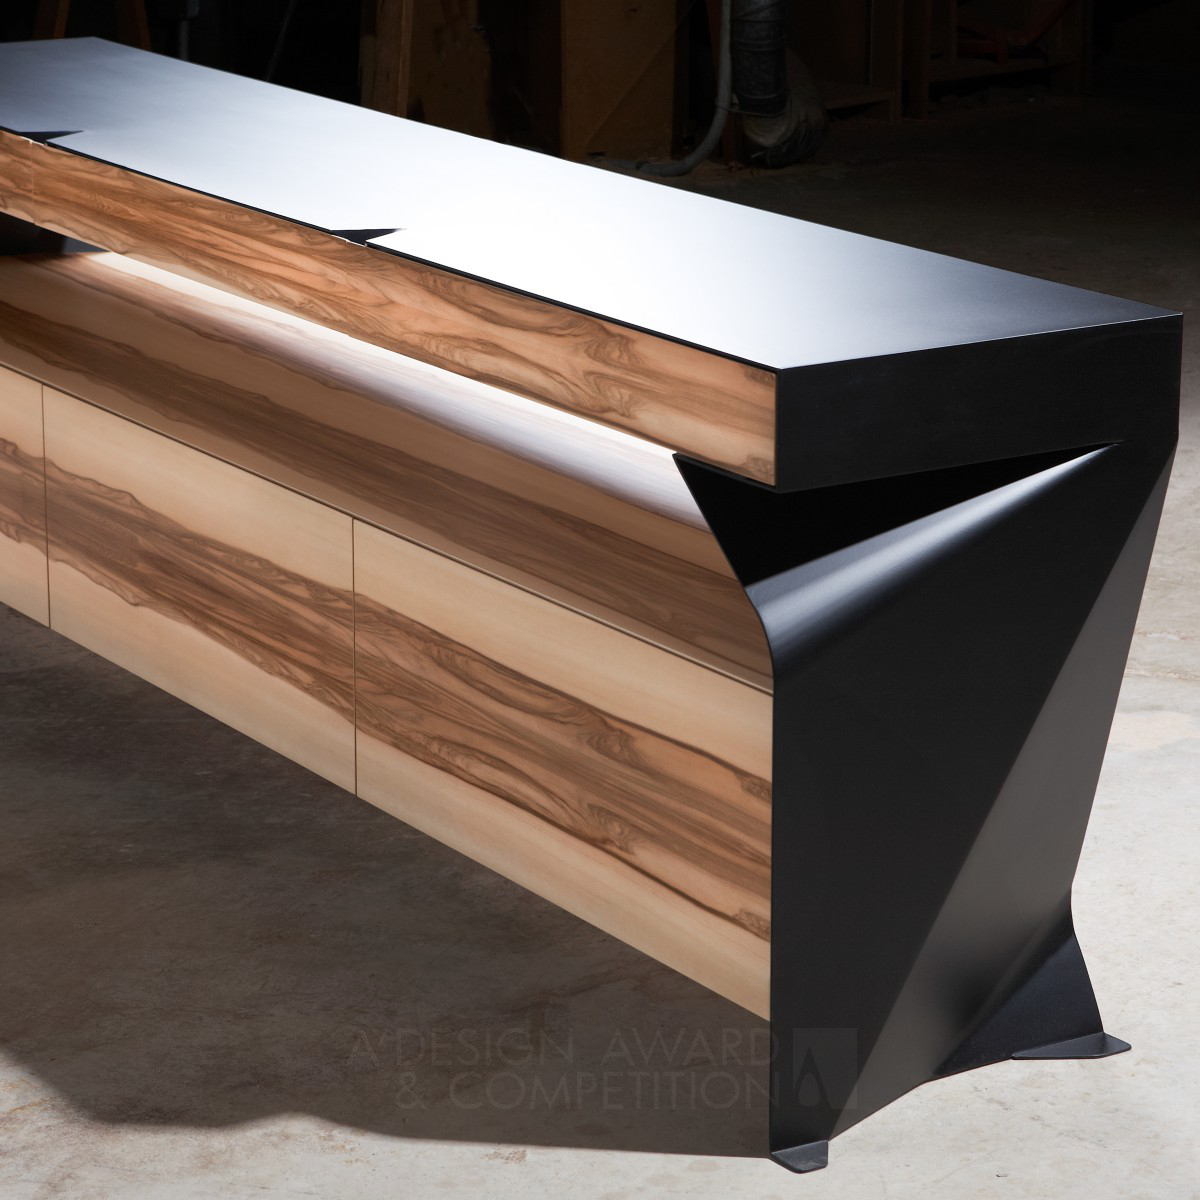 C1 Credenza by Marcus Friesl